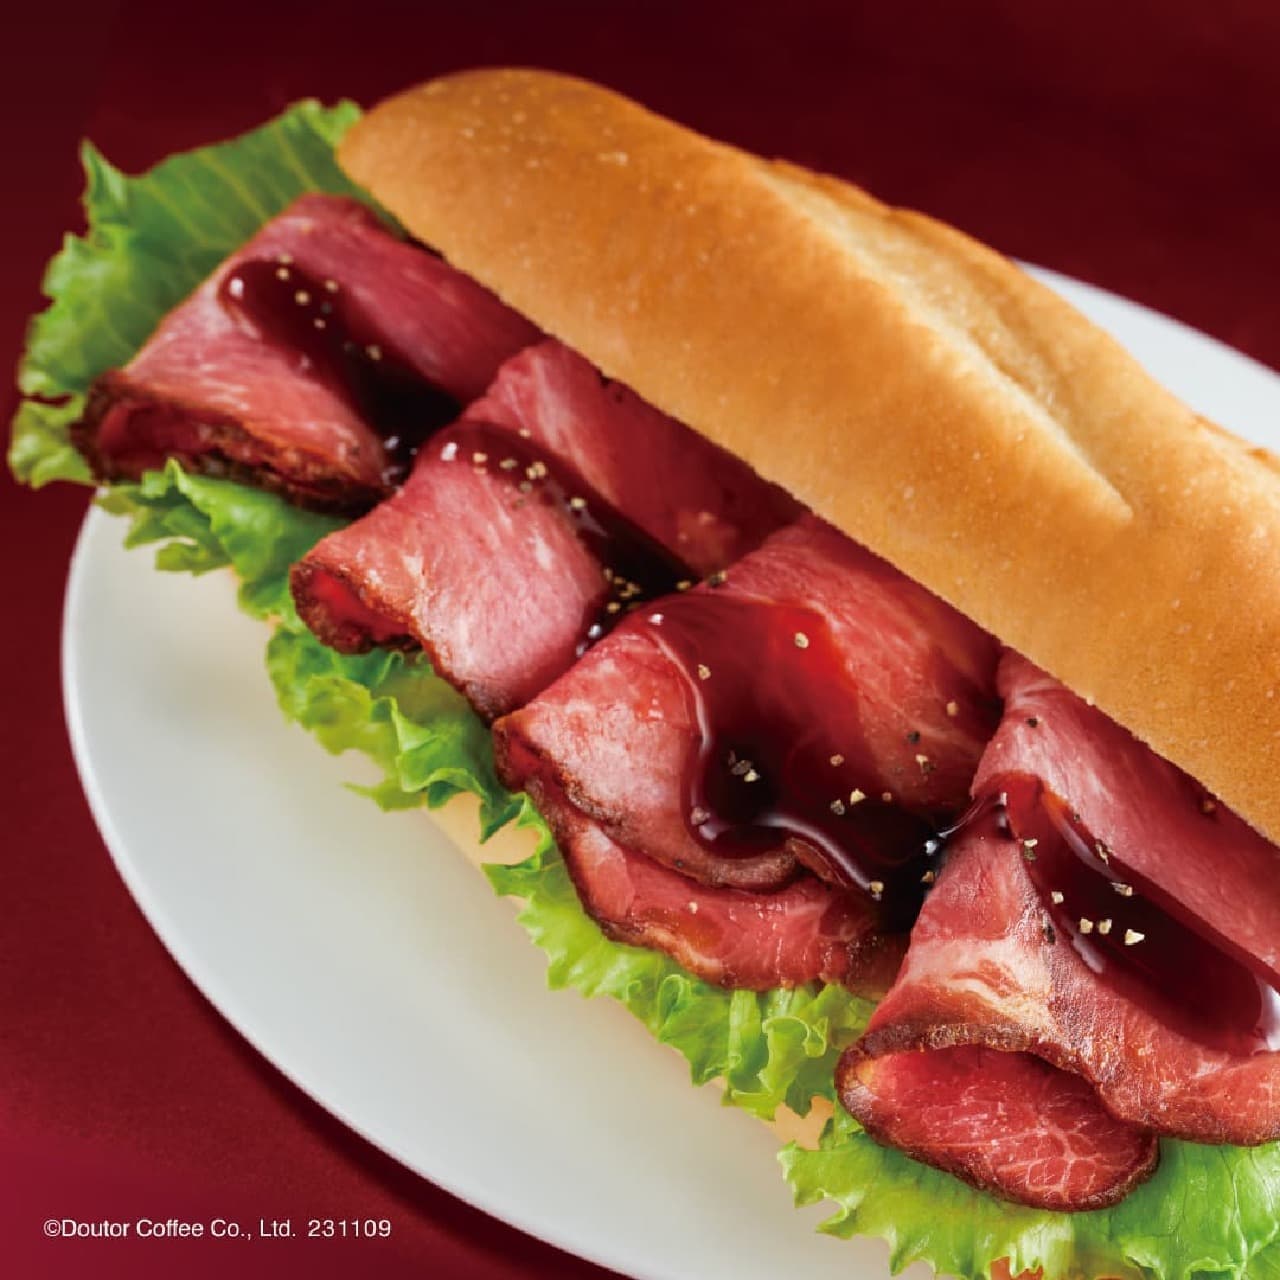 Doutor "Luxury Milano Sandwich - Roast Beef Grilled over Open Fire with Red Wine Balsamic Vinegar Sauce